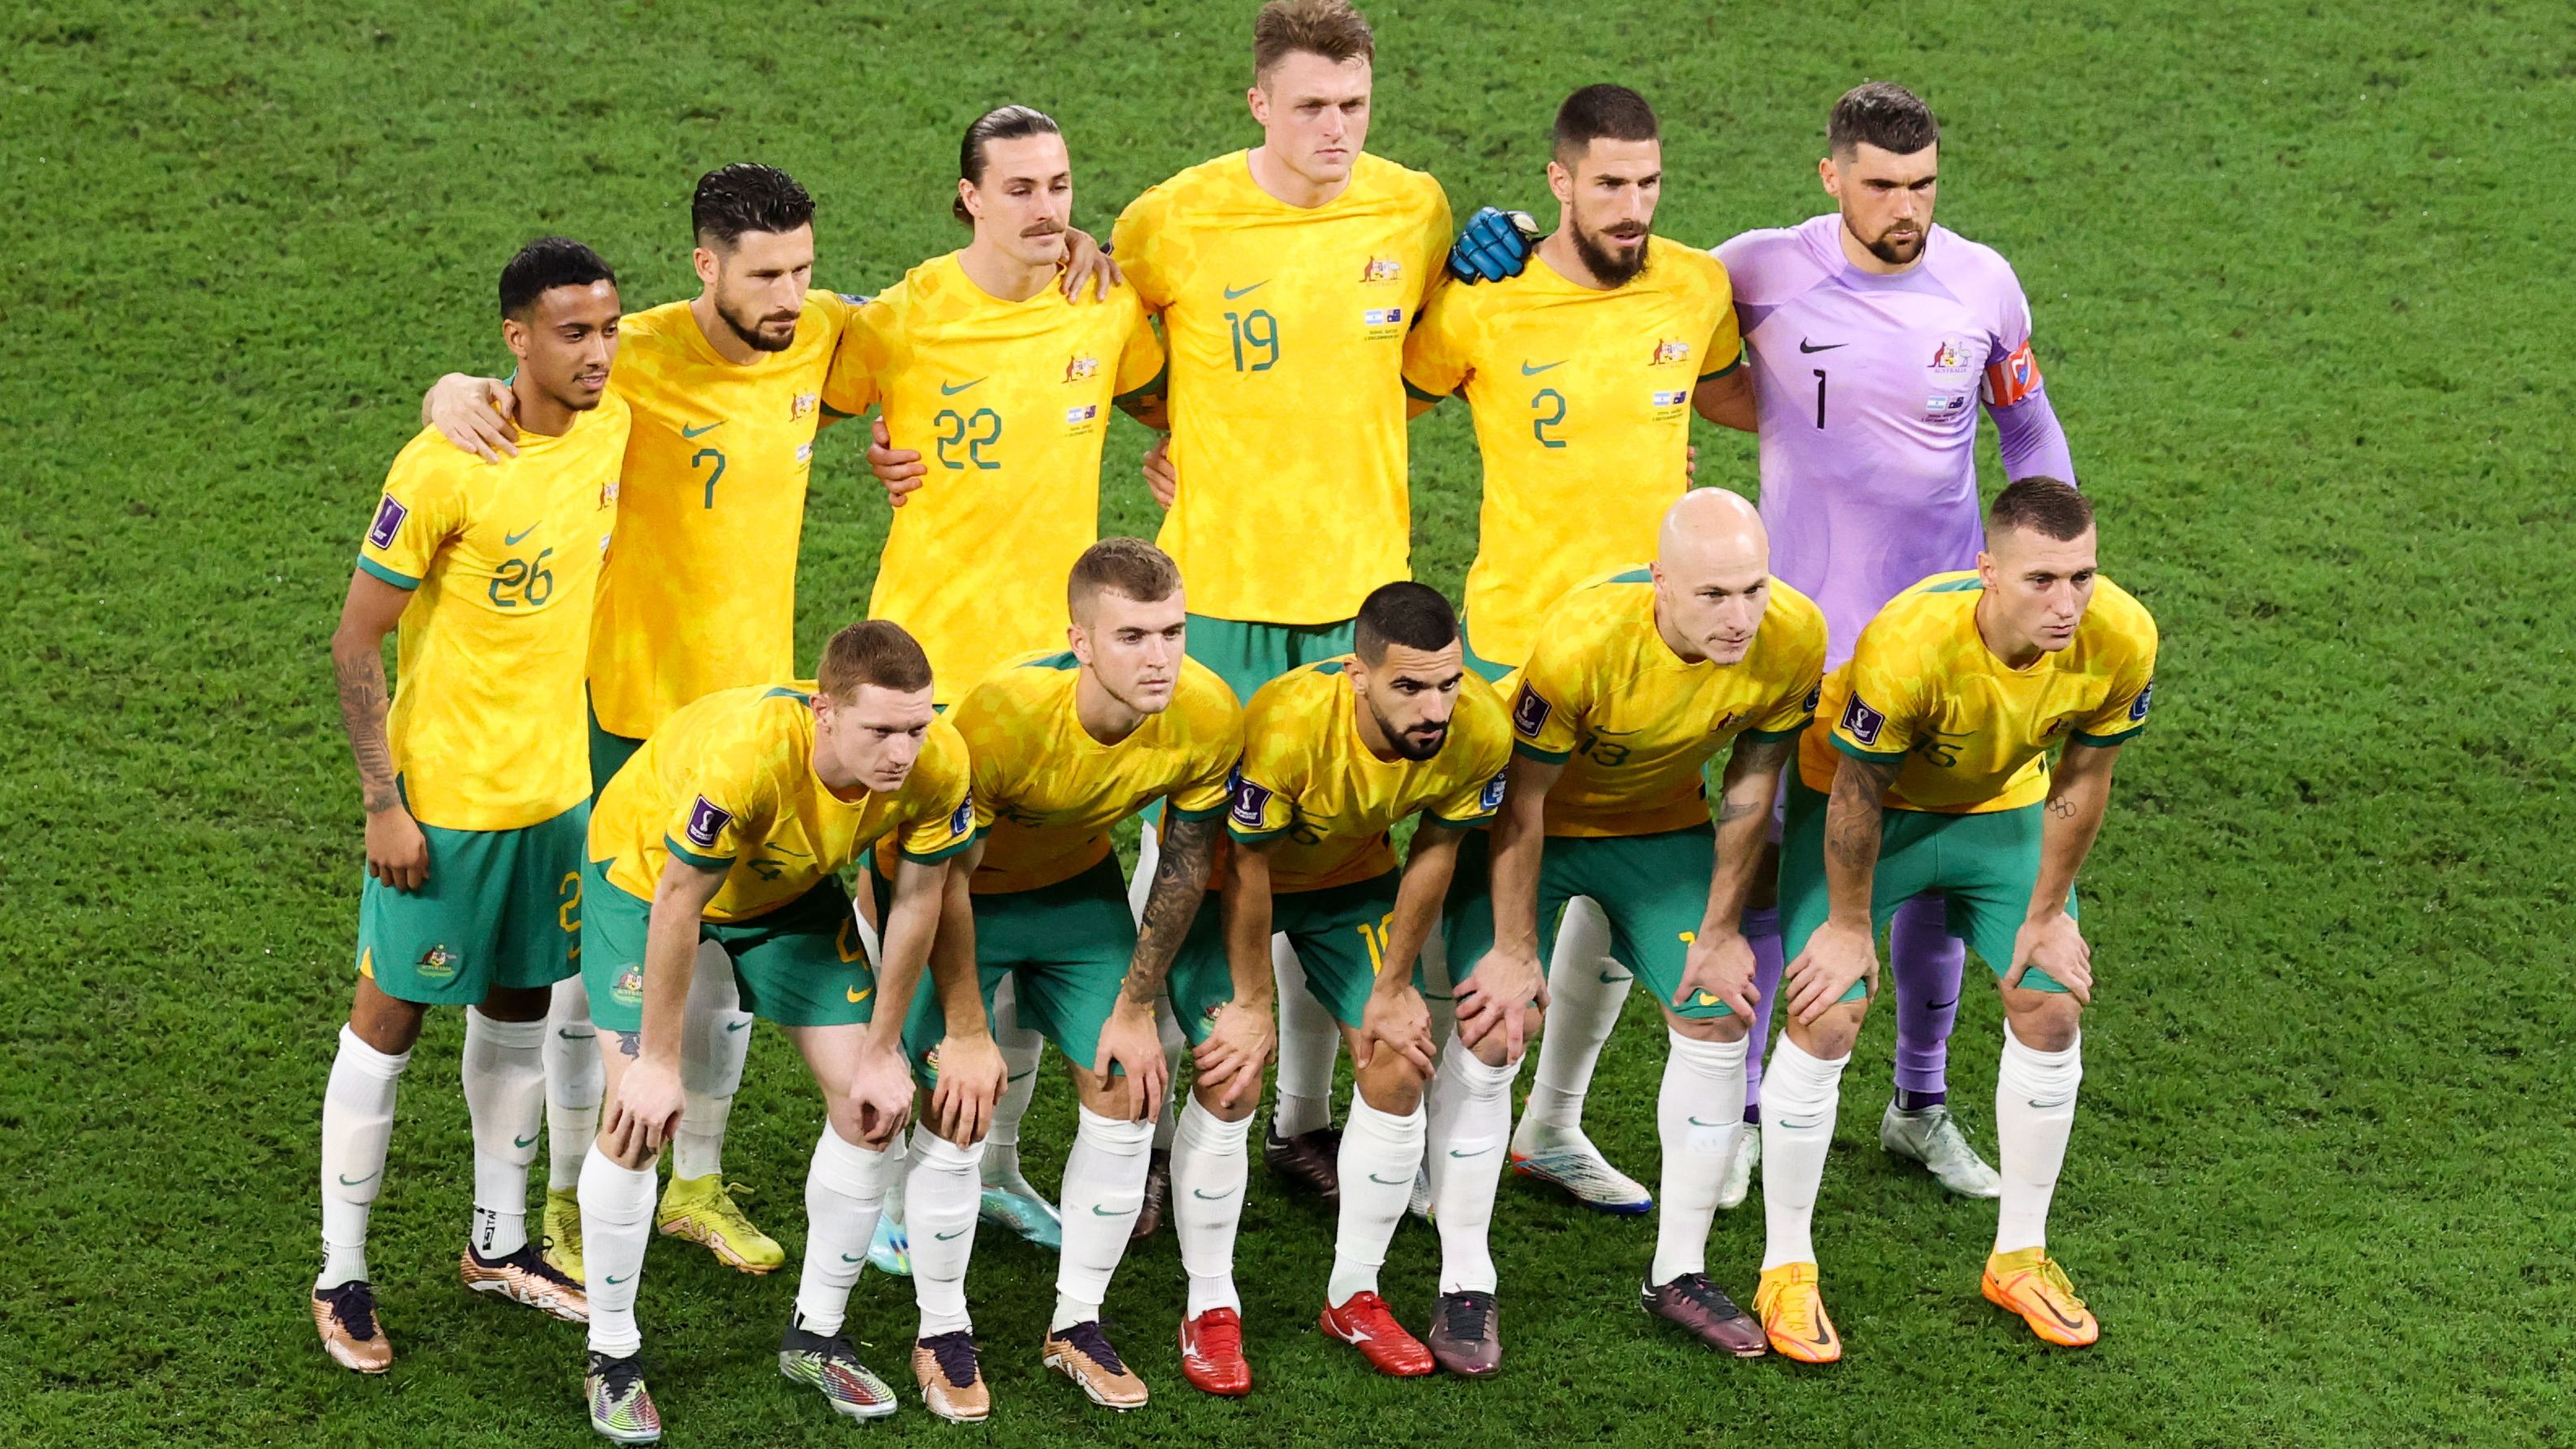 DOHA, QATAR - DECEMBER 03: Players of Australia line up for team photo during the FIFA World Cup Qatar 2022 Round of 16 match between Argentina and Australia at Ahmad Bin Ali Stadium on December 03, 2022 in Doha, Qatar. (Photo by Zhizhao Wu/Getty Images)